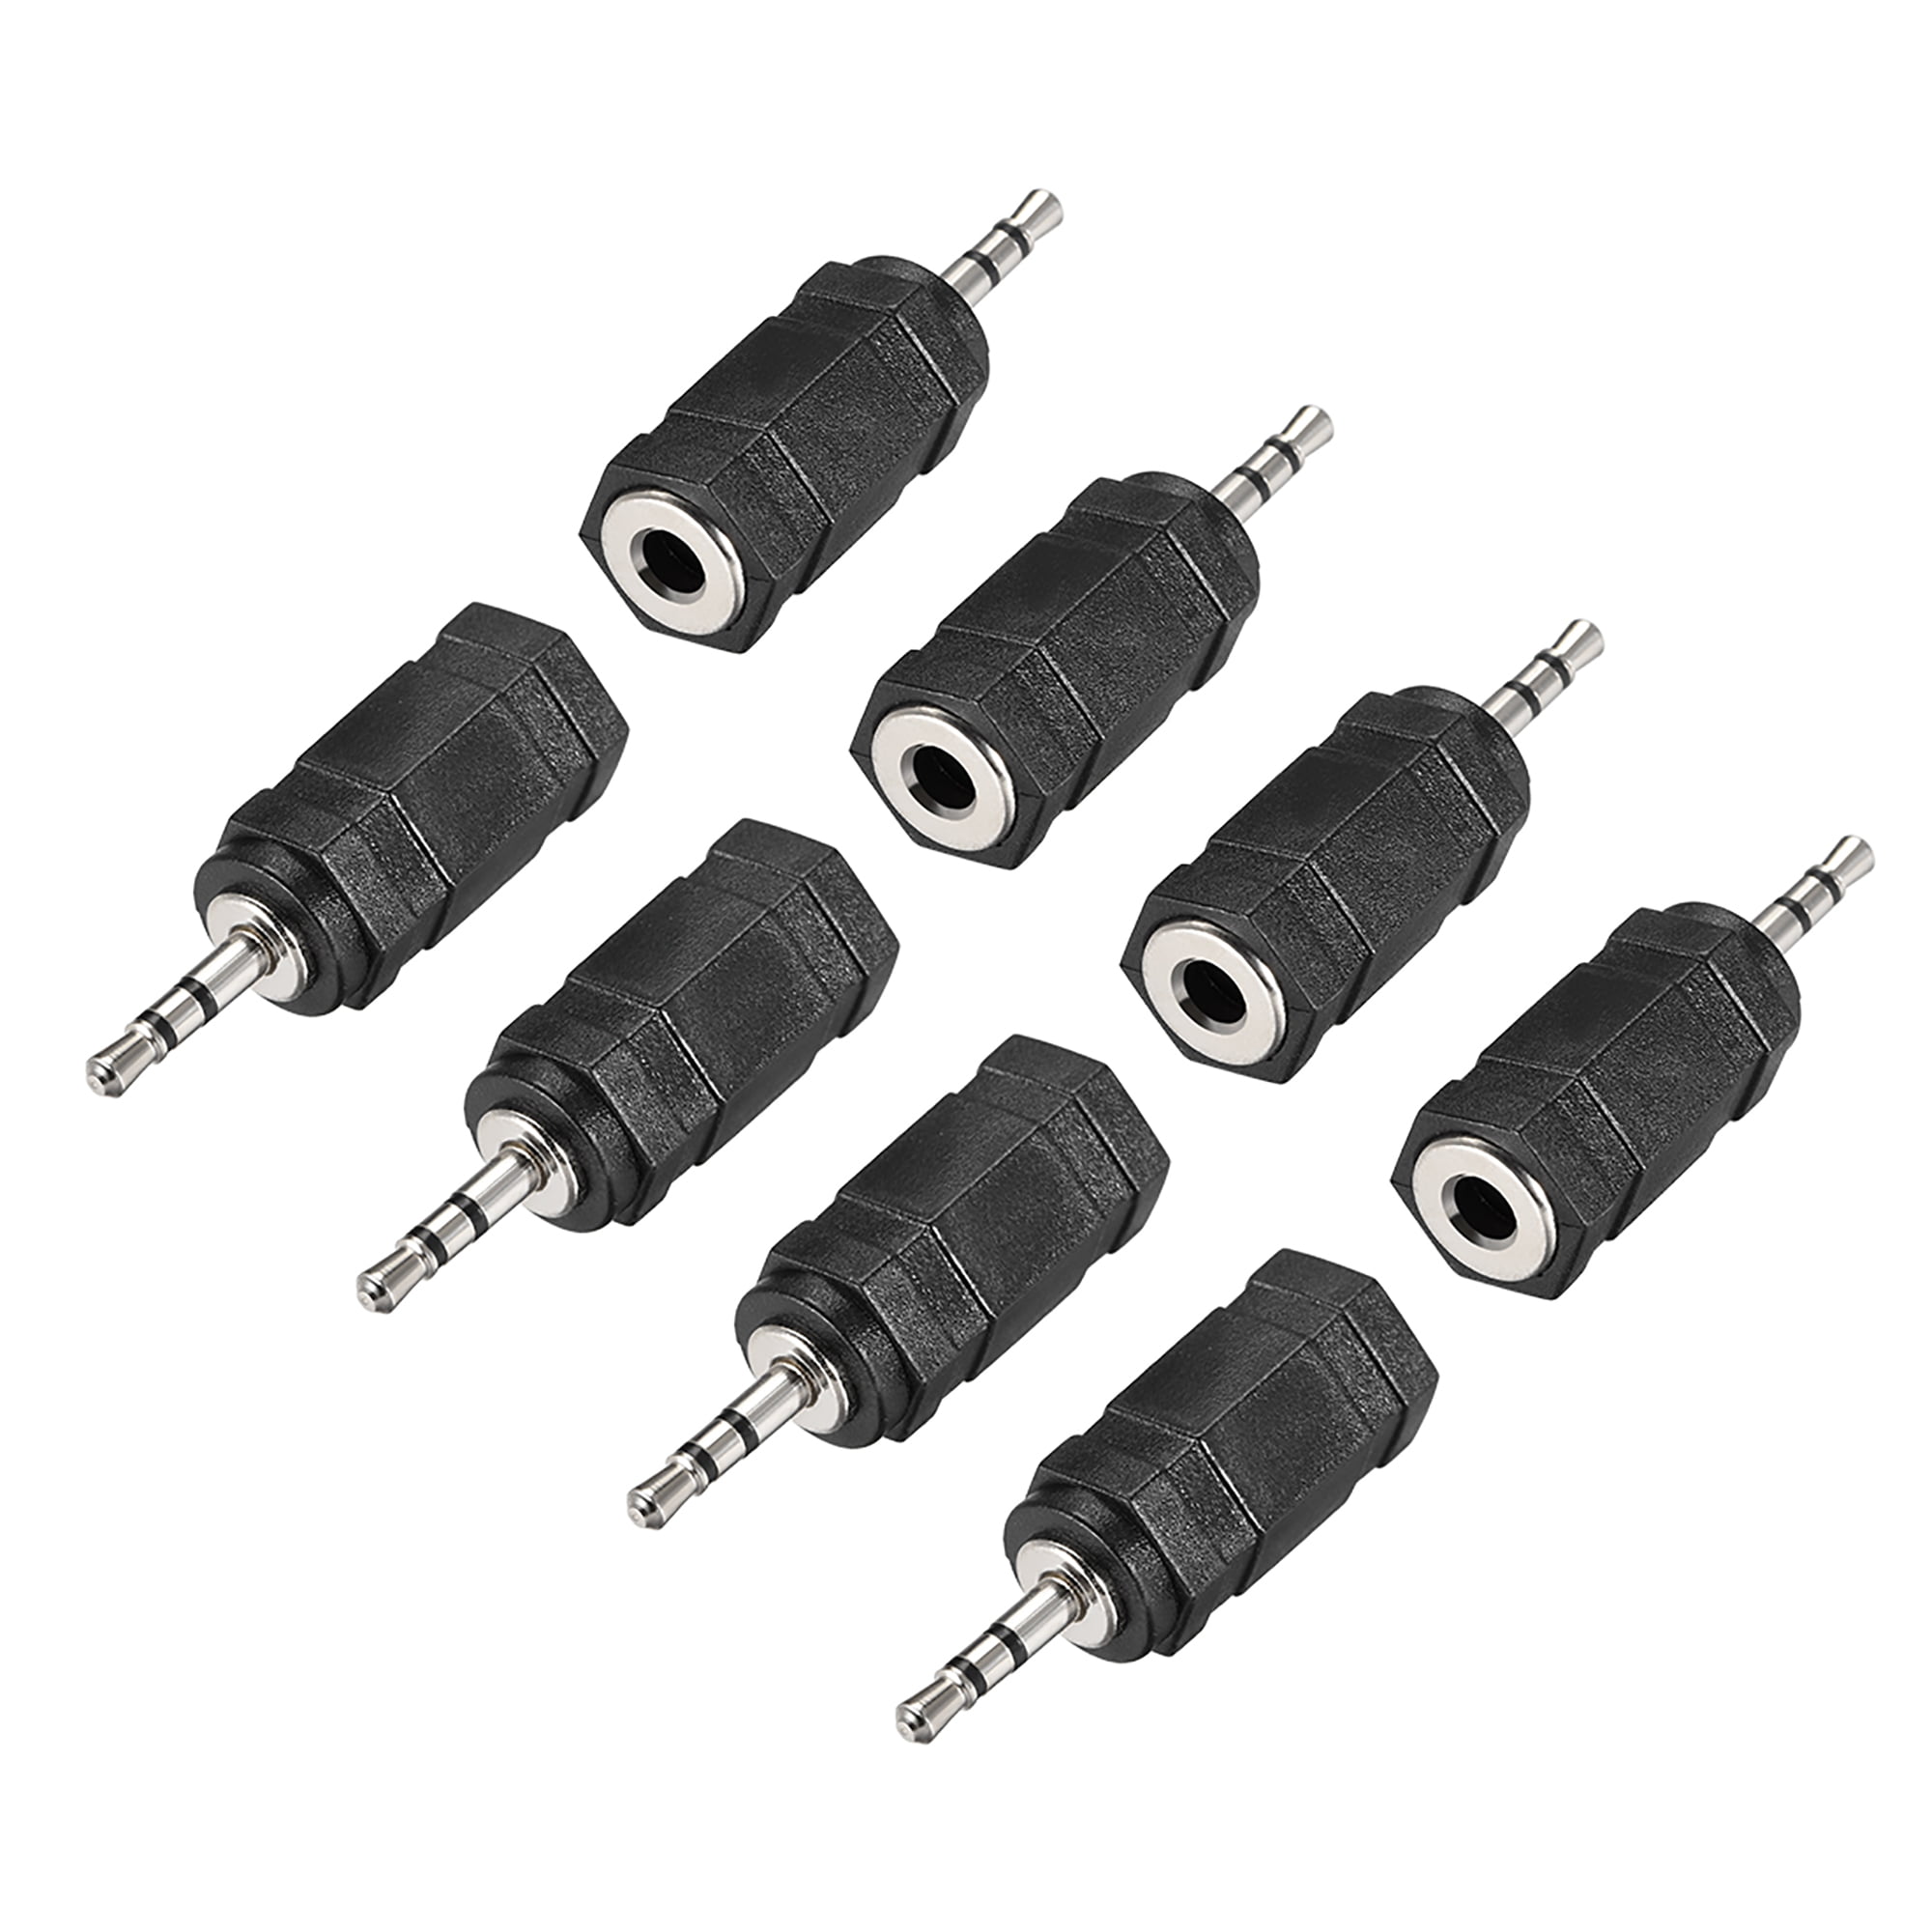 2.5mm Male to 3.5mm Female Connector Stereo Audio Adapter Converter